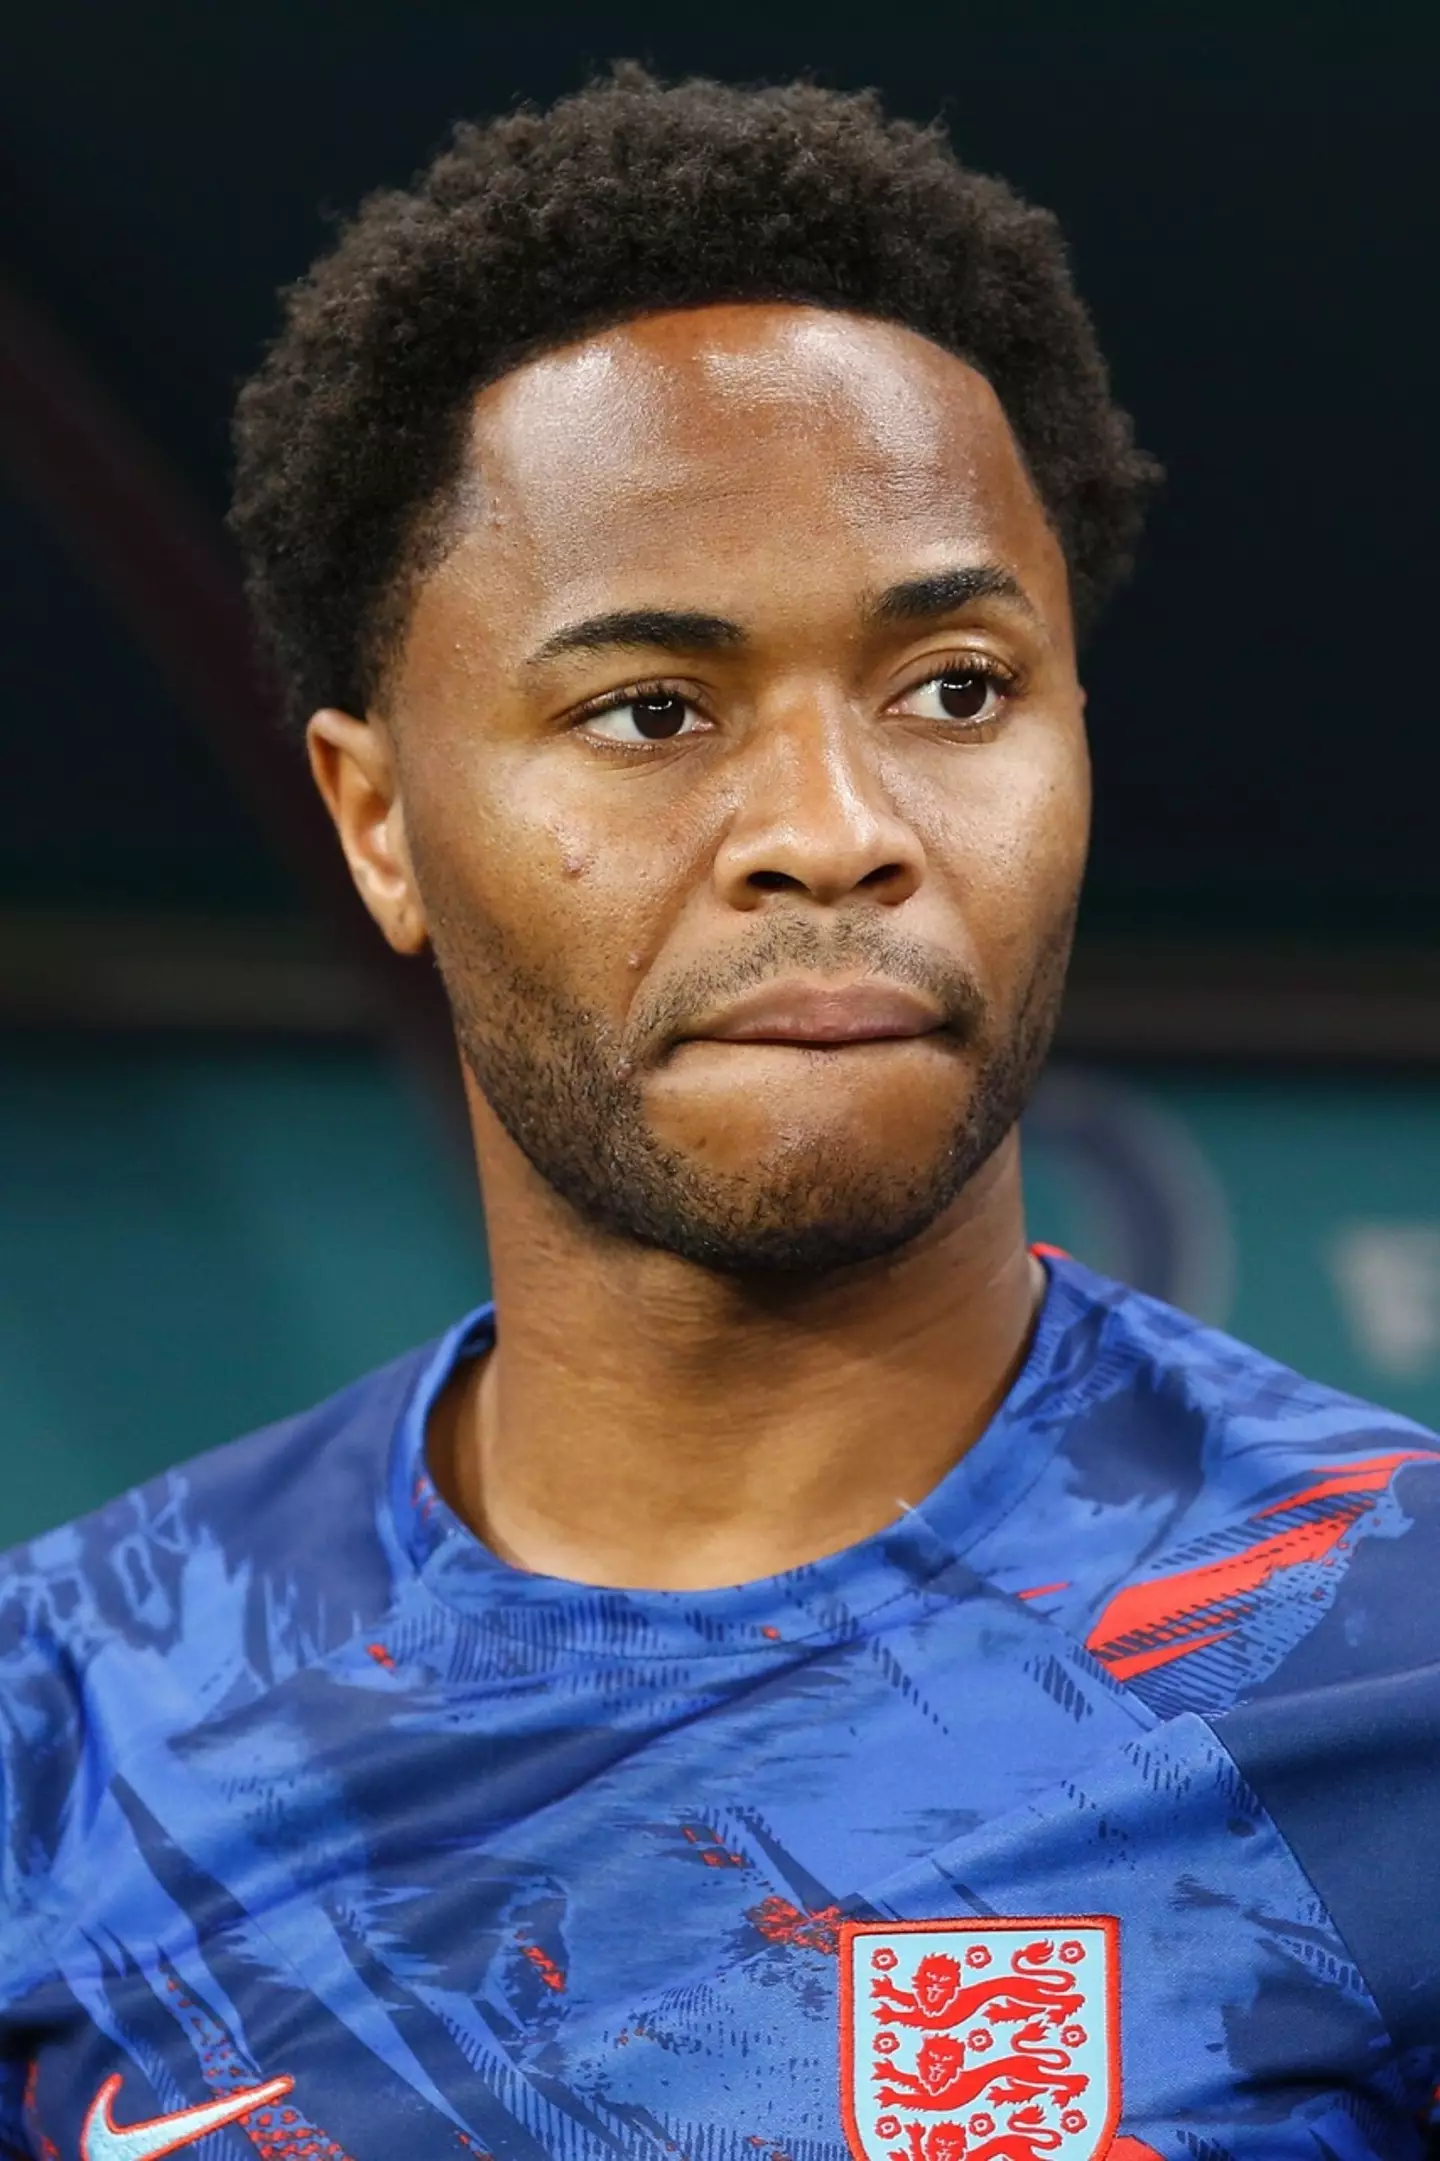 Raheem Sterling's house was among those targeted by the burglars.